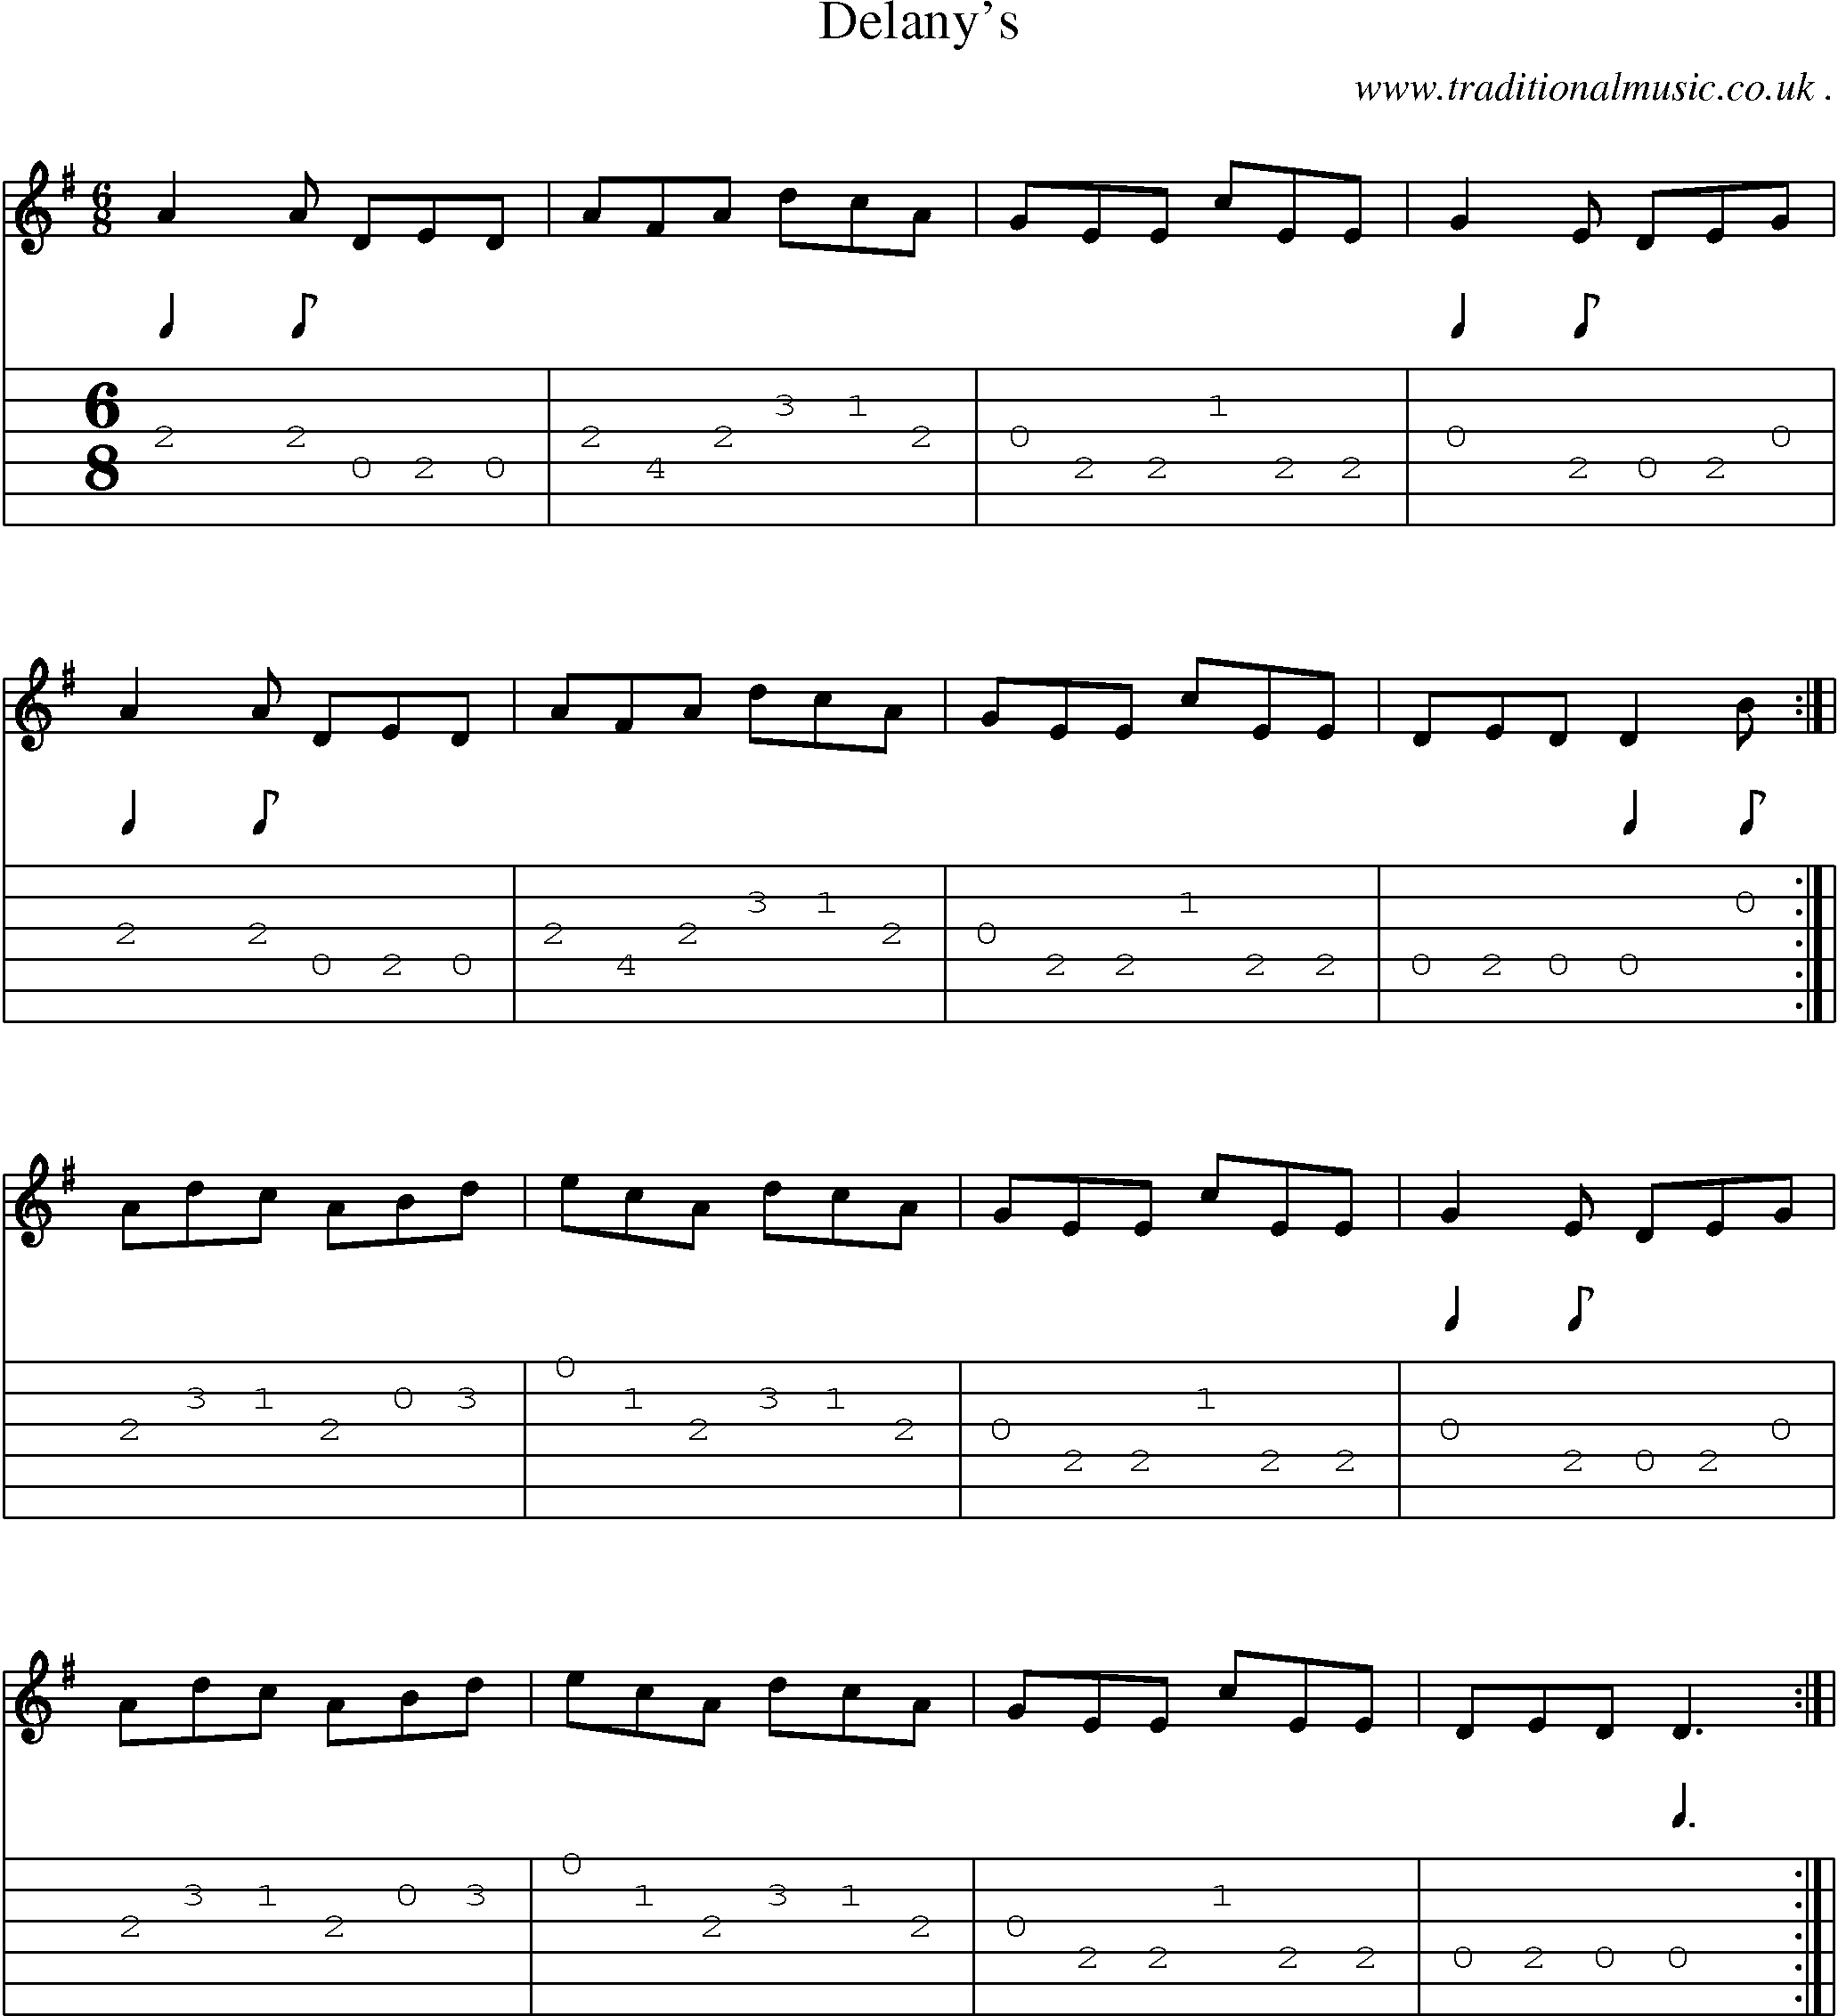 Sheet-Music and Guitar Tabs for Delanys